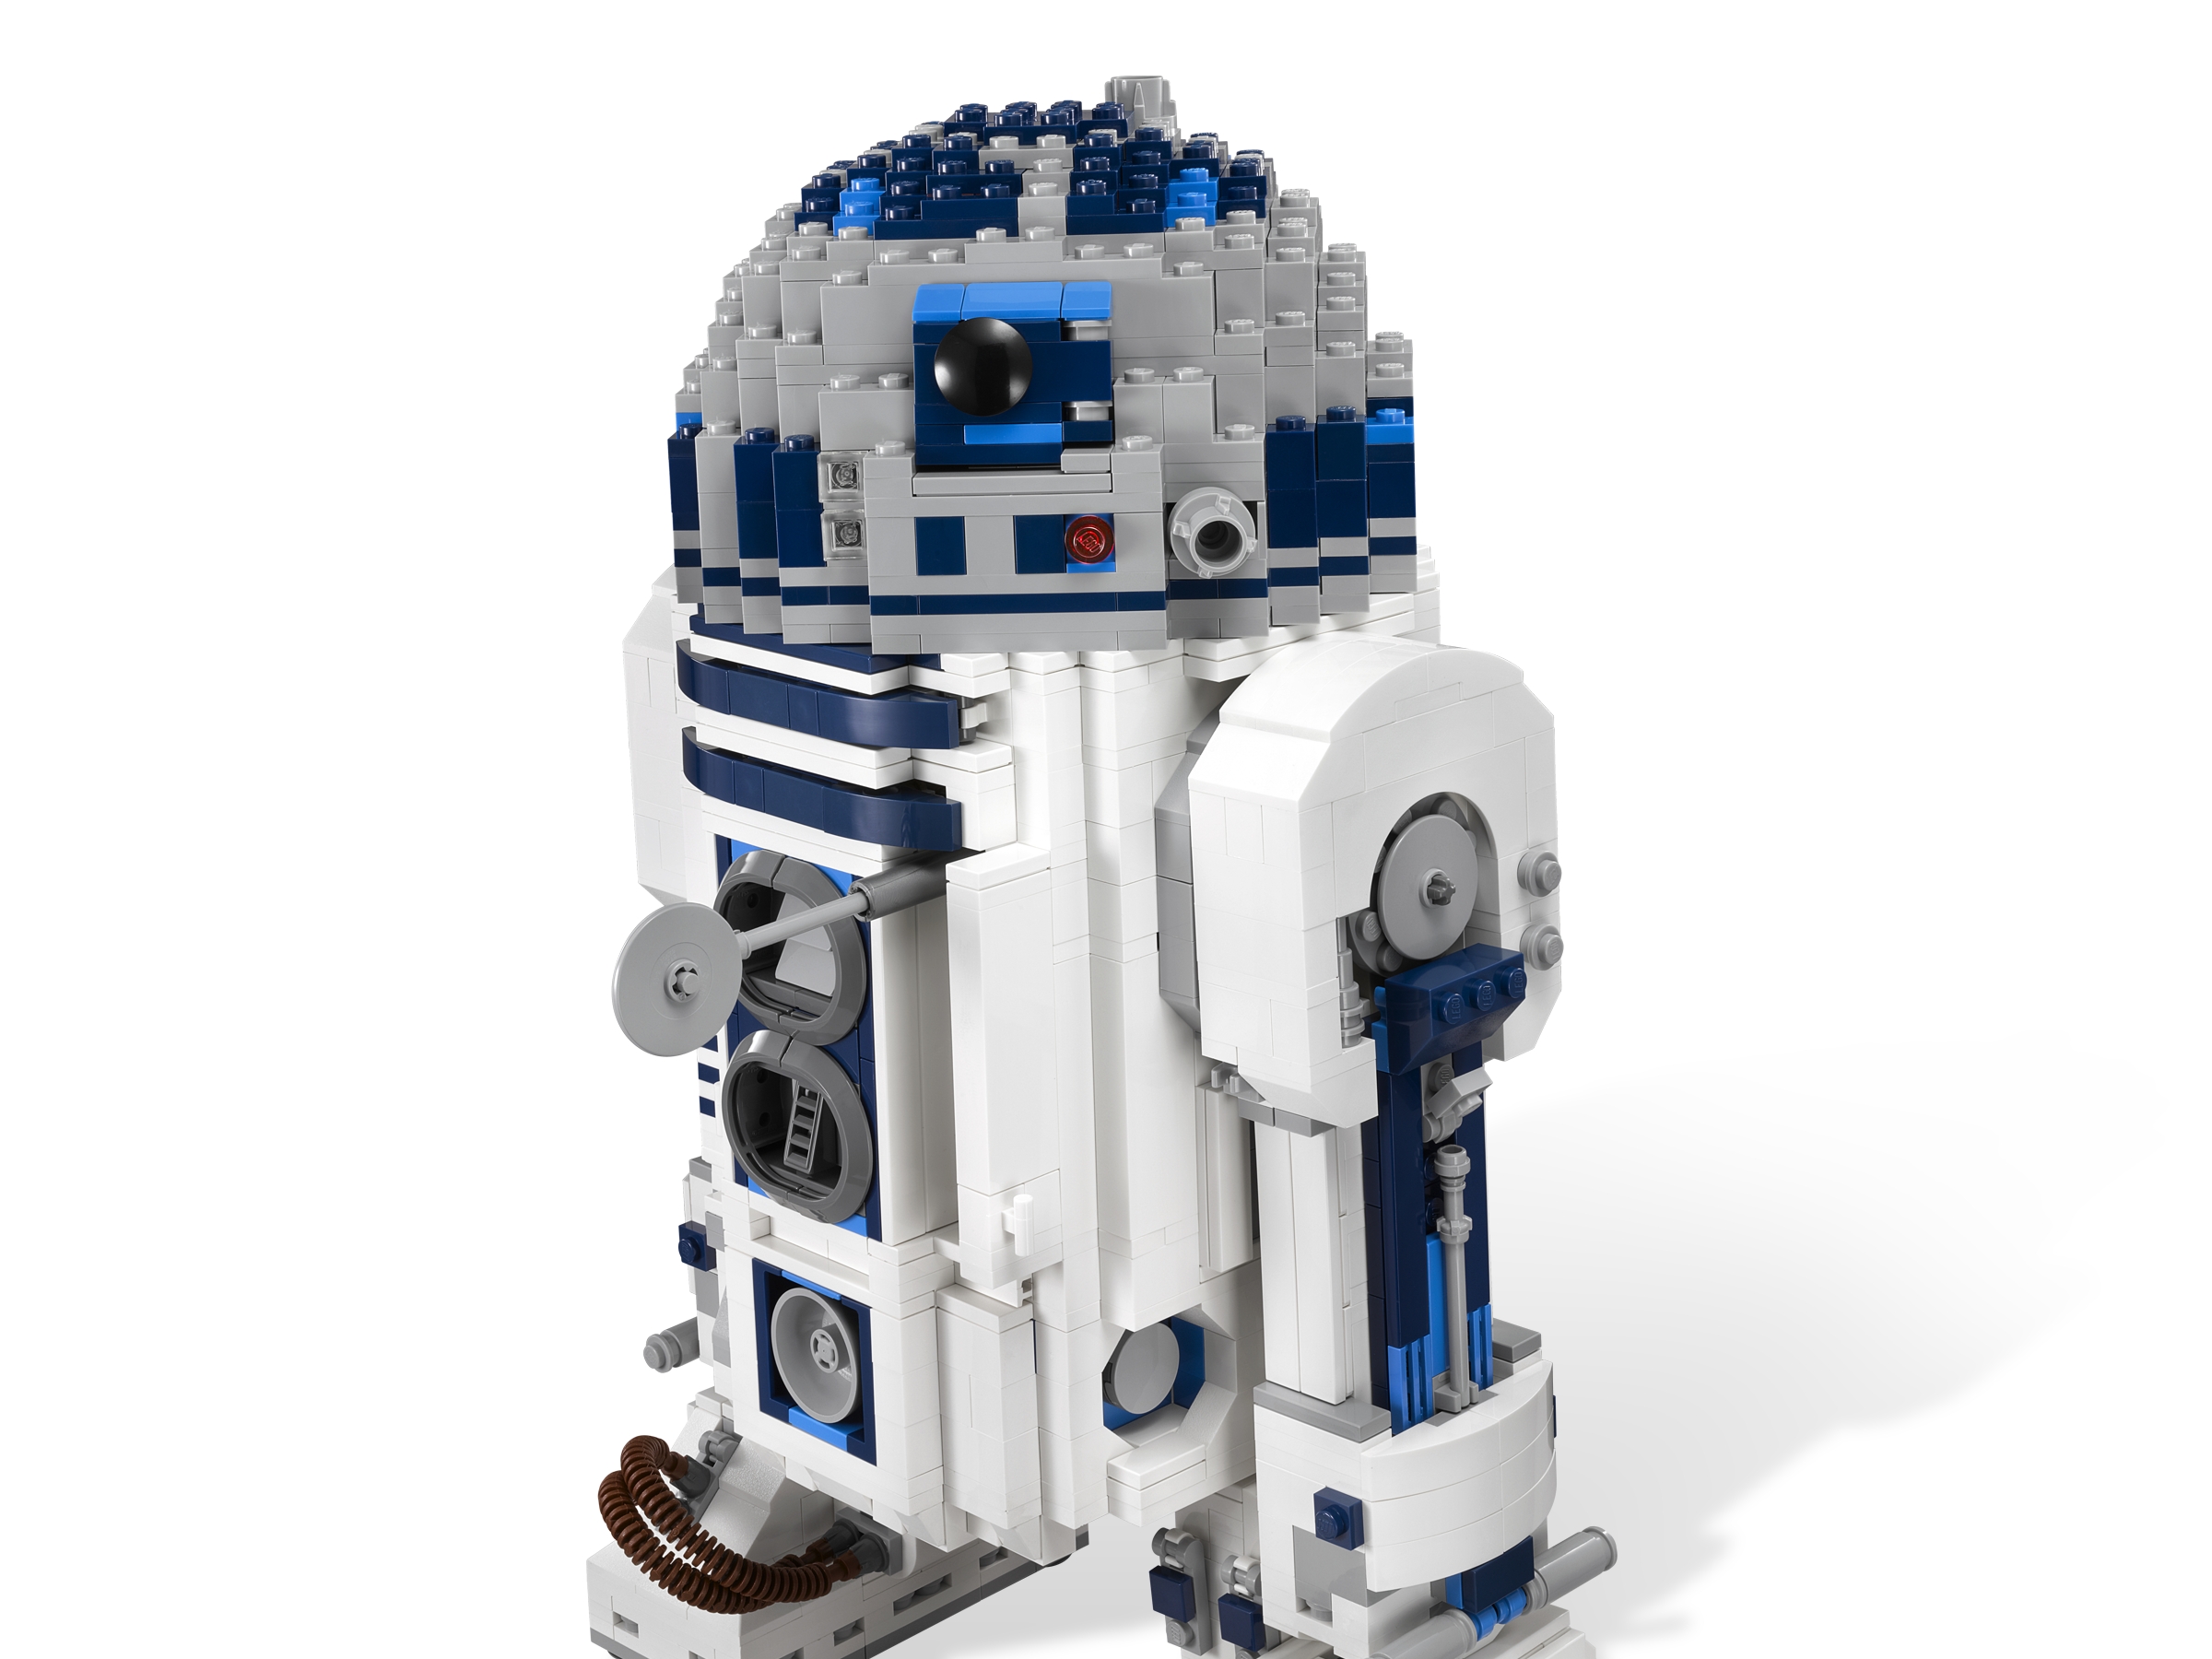 r2d2 lego geant